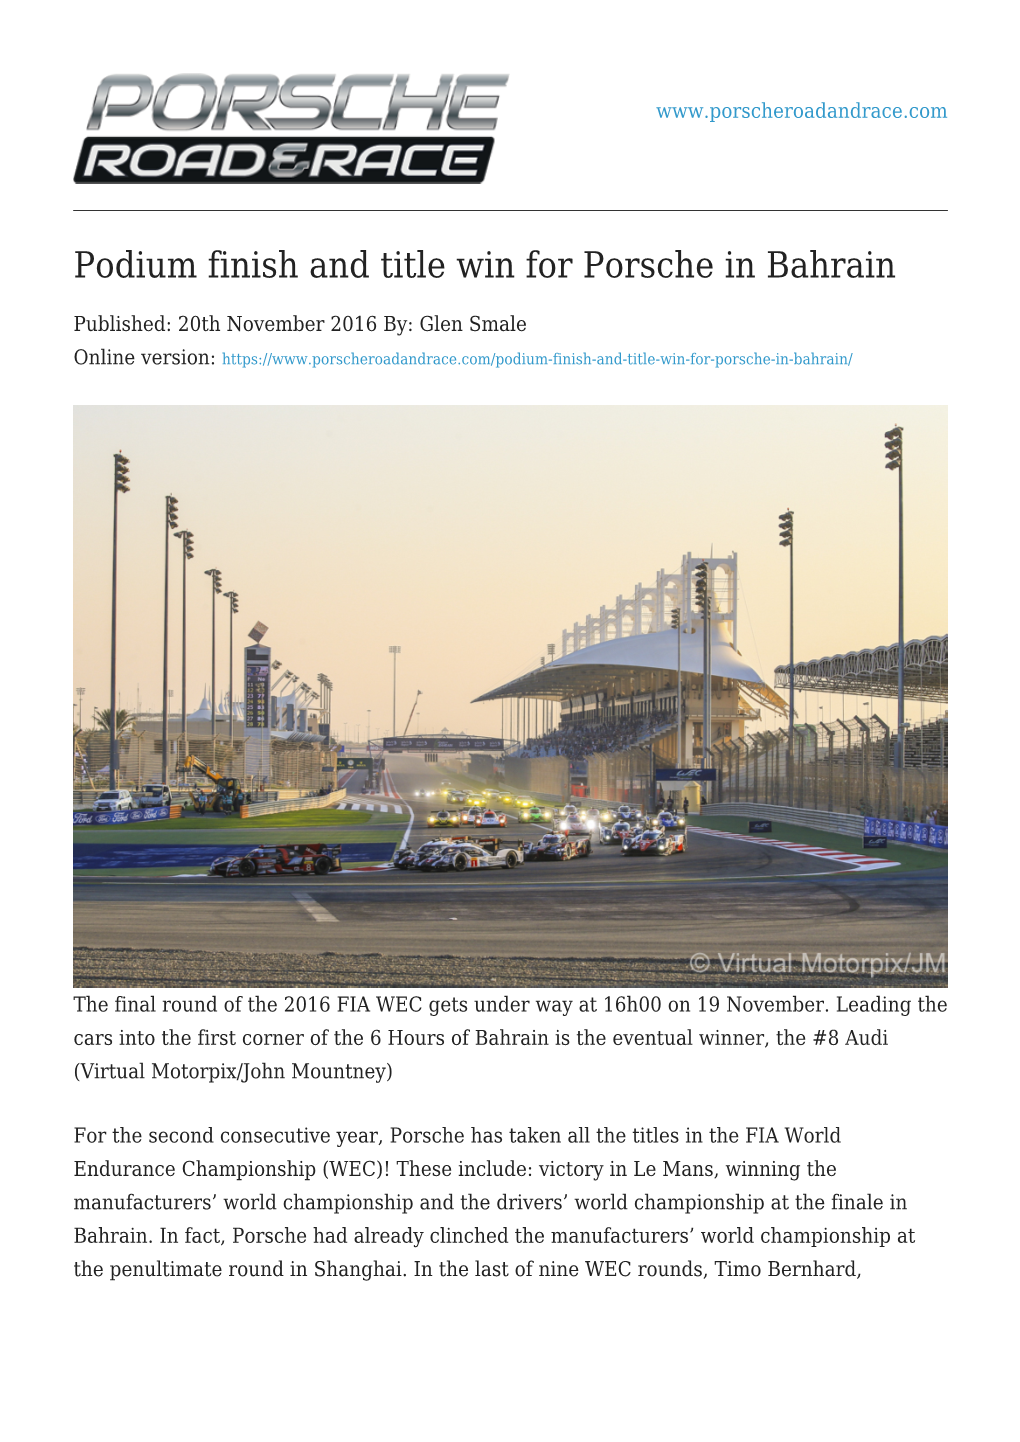 Podium Finish and Title Win for Porsche in Bahrain